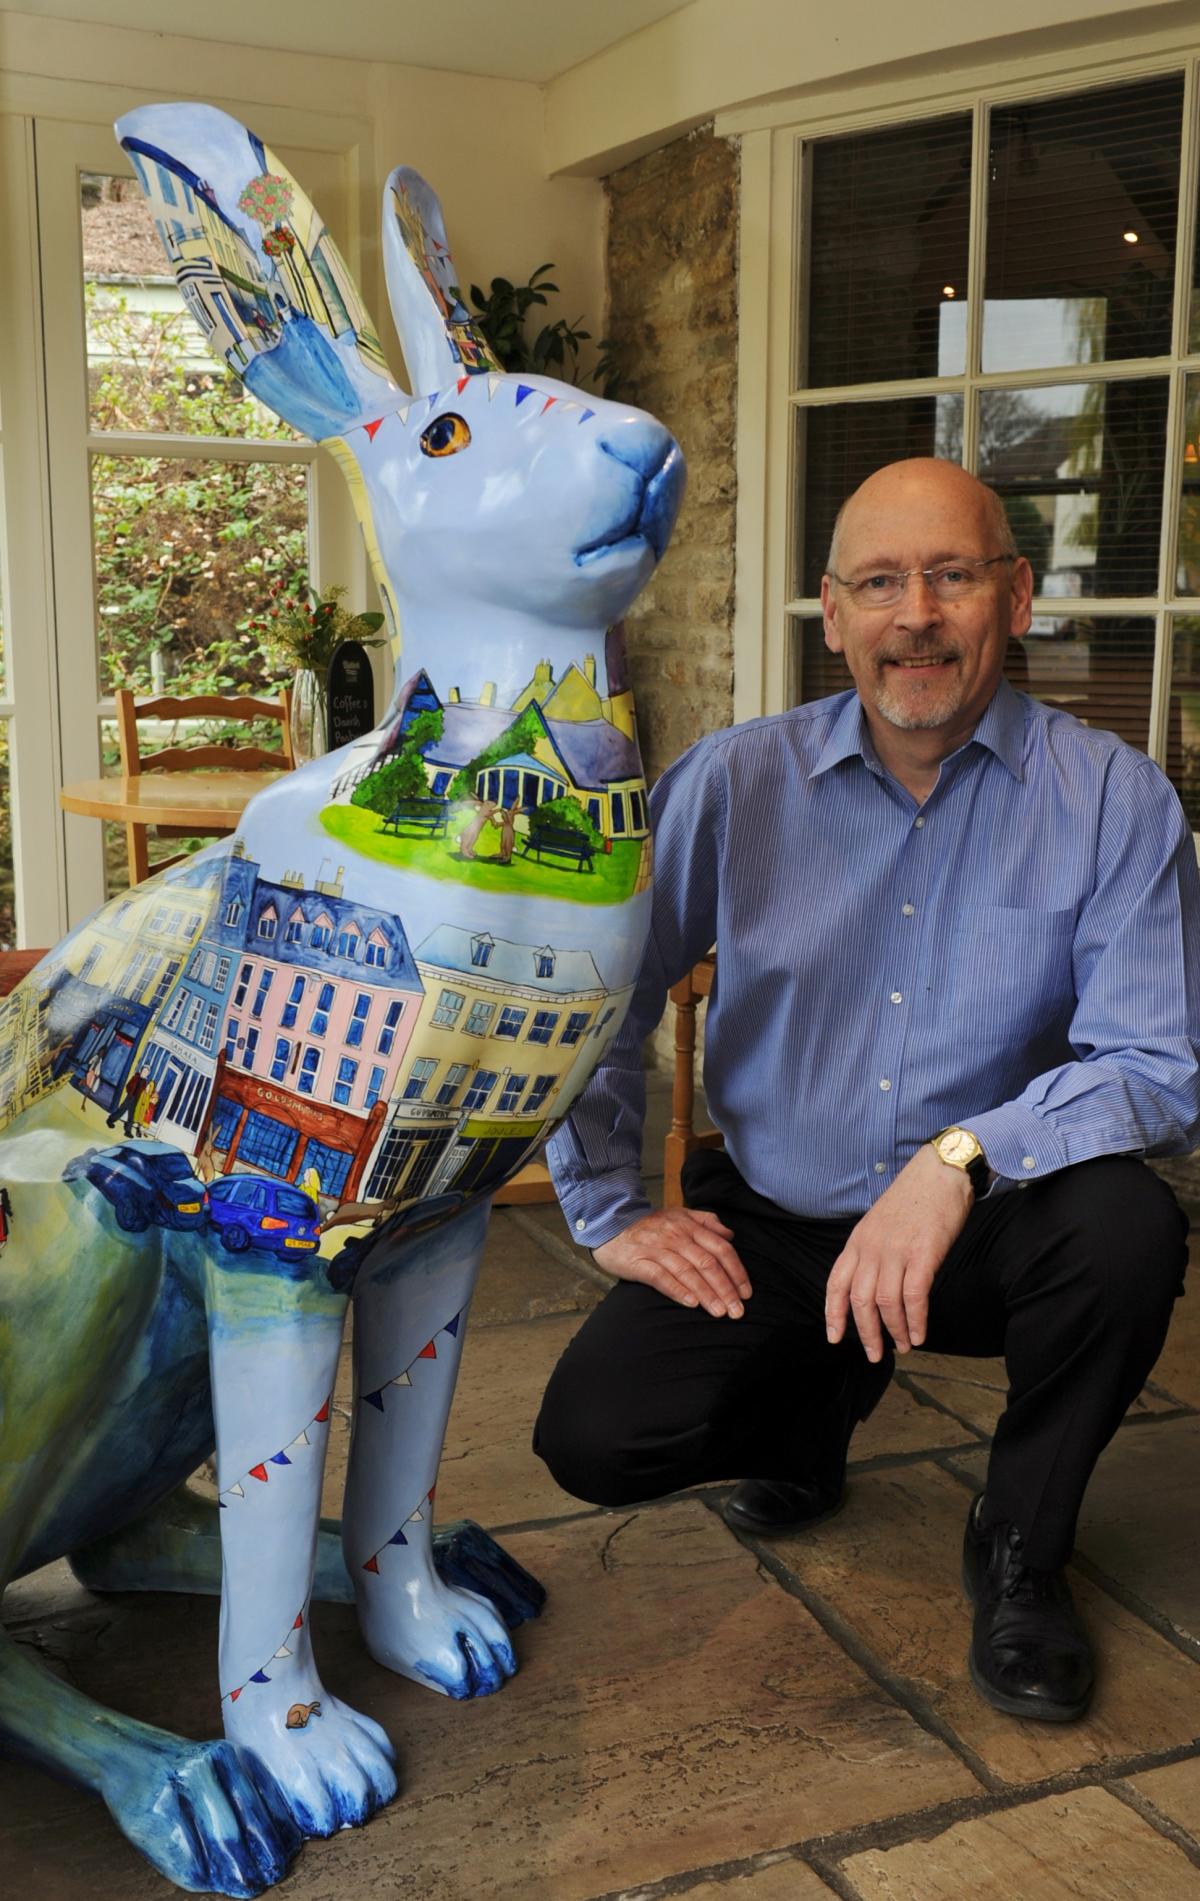 Tim Waller, proprietor of the Corinium Hotel in Gloucester Street, with Corinna the hare by artist Laura Fearn